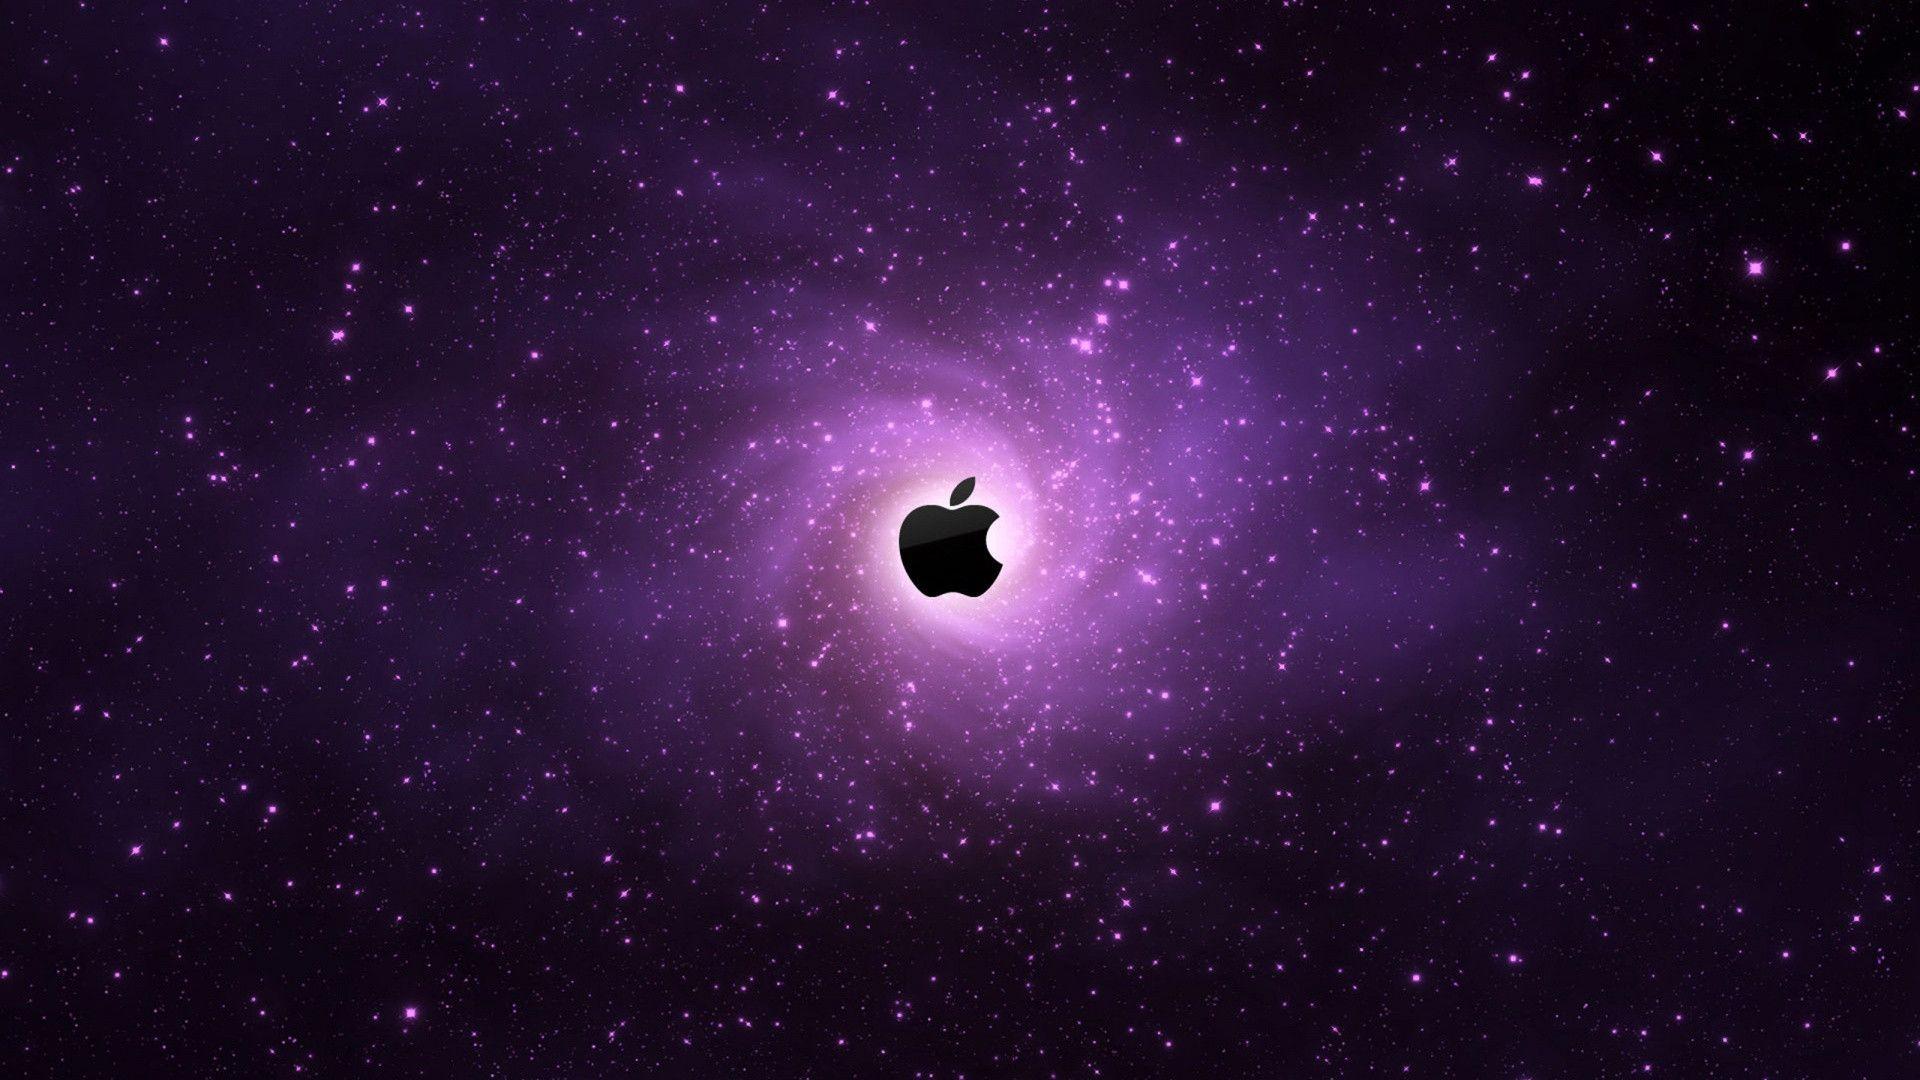 Pastel Galaxy Computer Wallpapers Top Free Pastel Galaxy - galaxy cool computer backgrounds hd